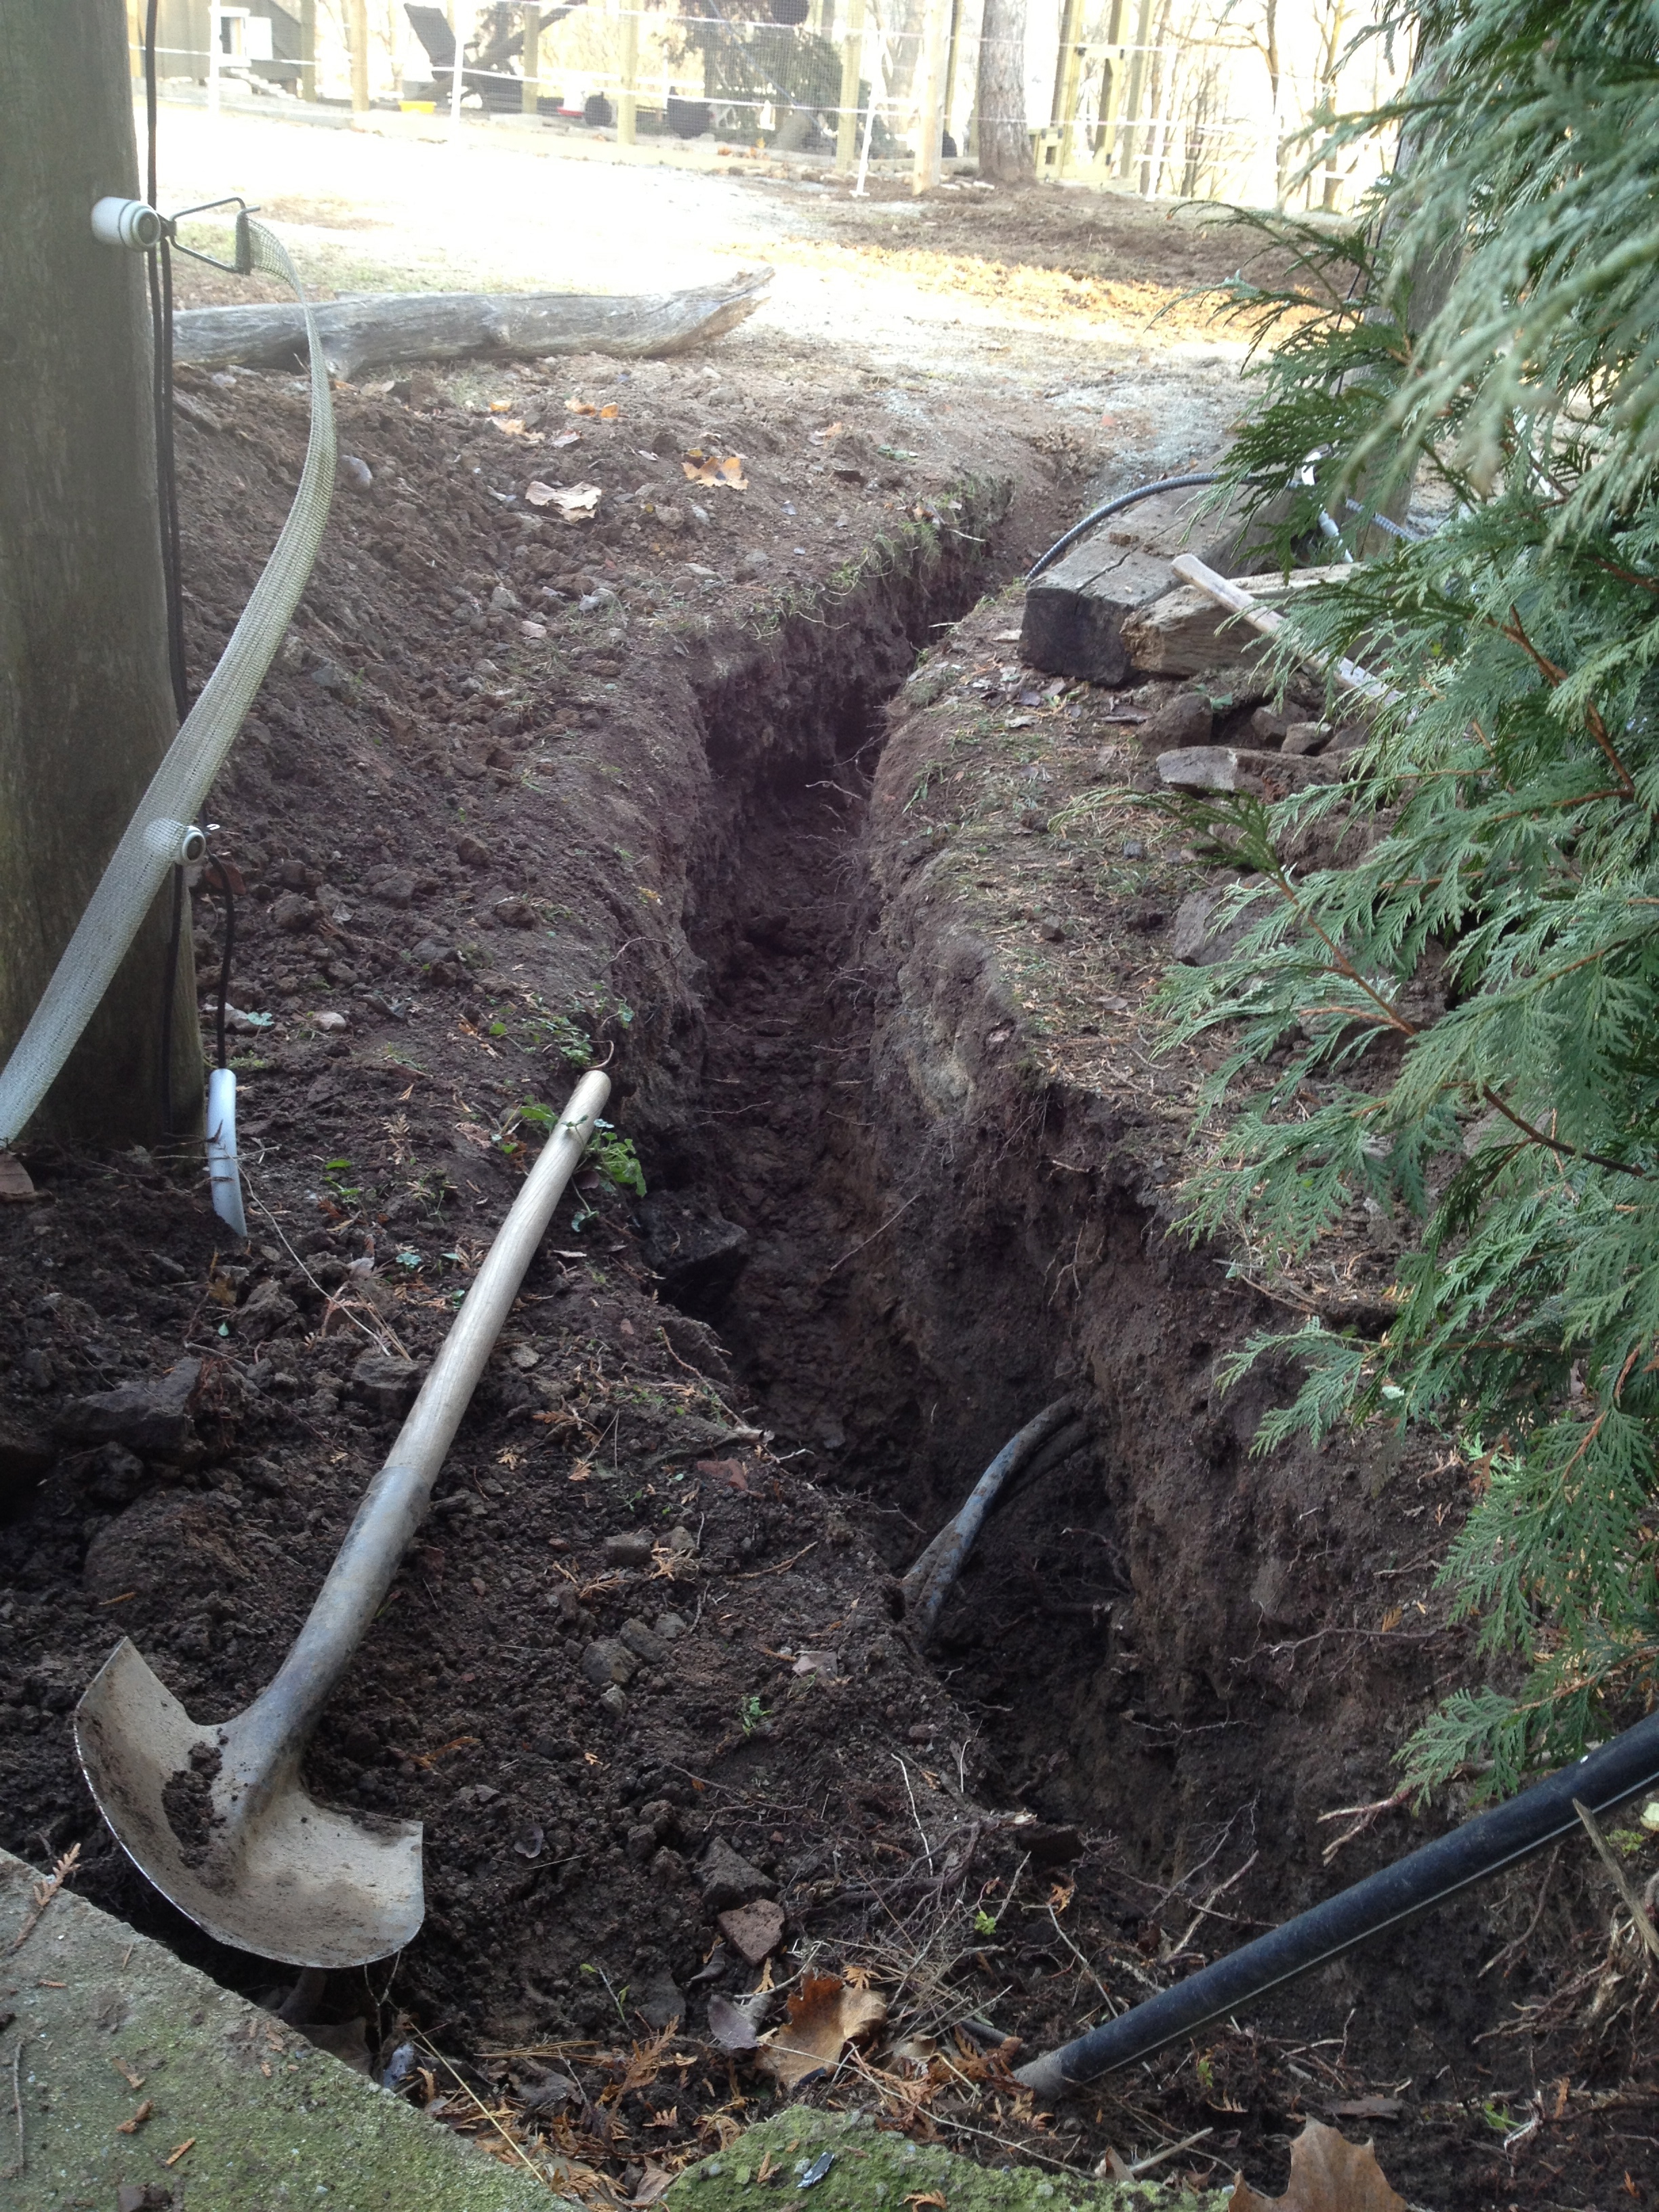 And finally the last section is dug out for the electrical, Yeah :)
A total of 60 - 70 foot long trench for the electrical